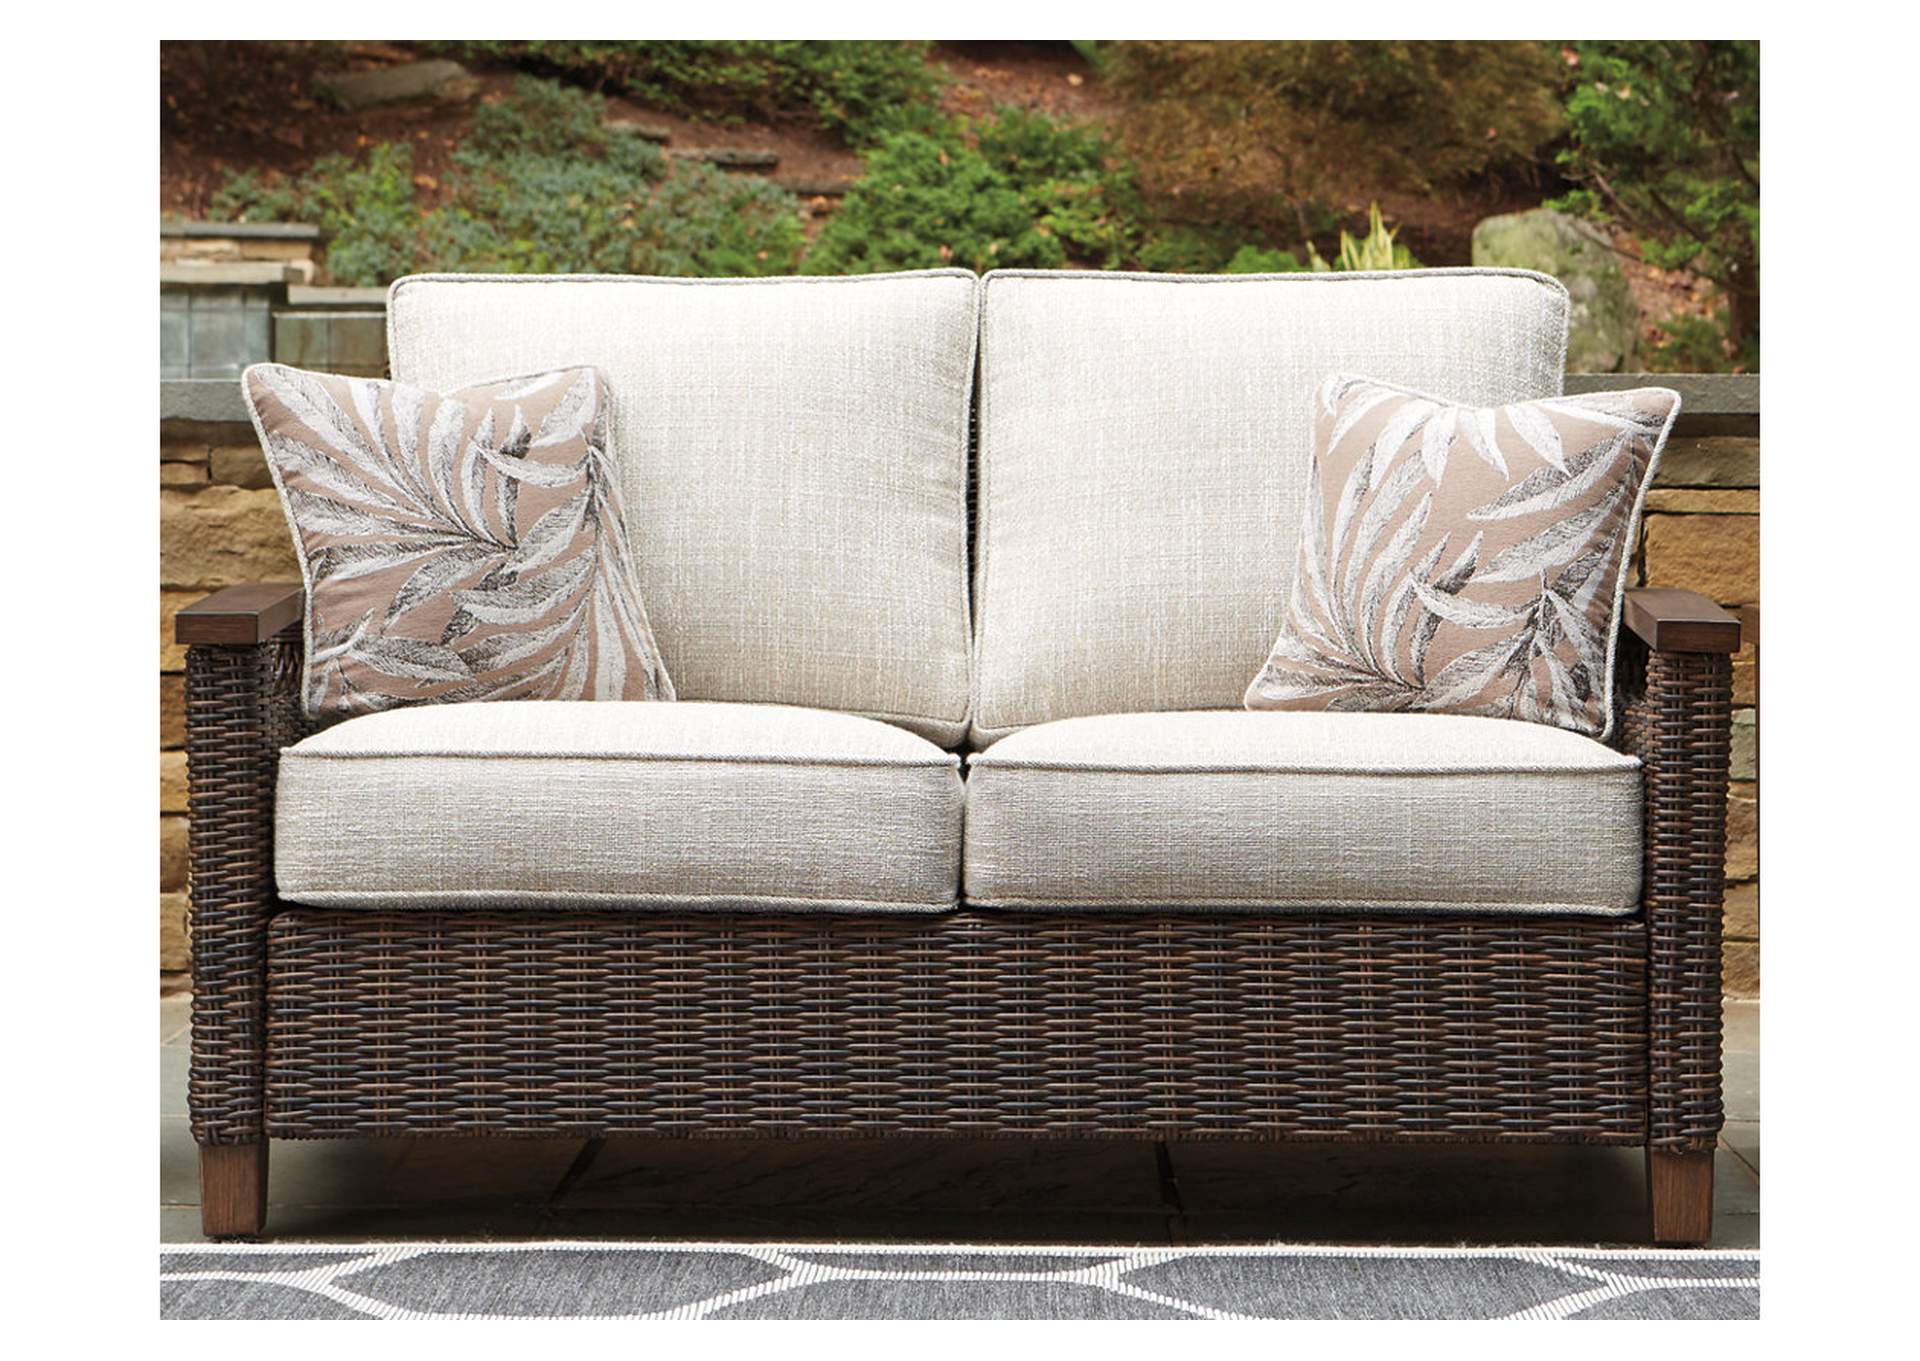 Paradise Trail Loveseat with Cushion,Outdoor By Ashley